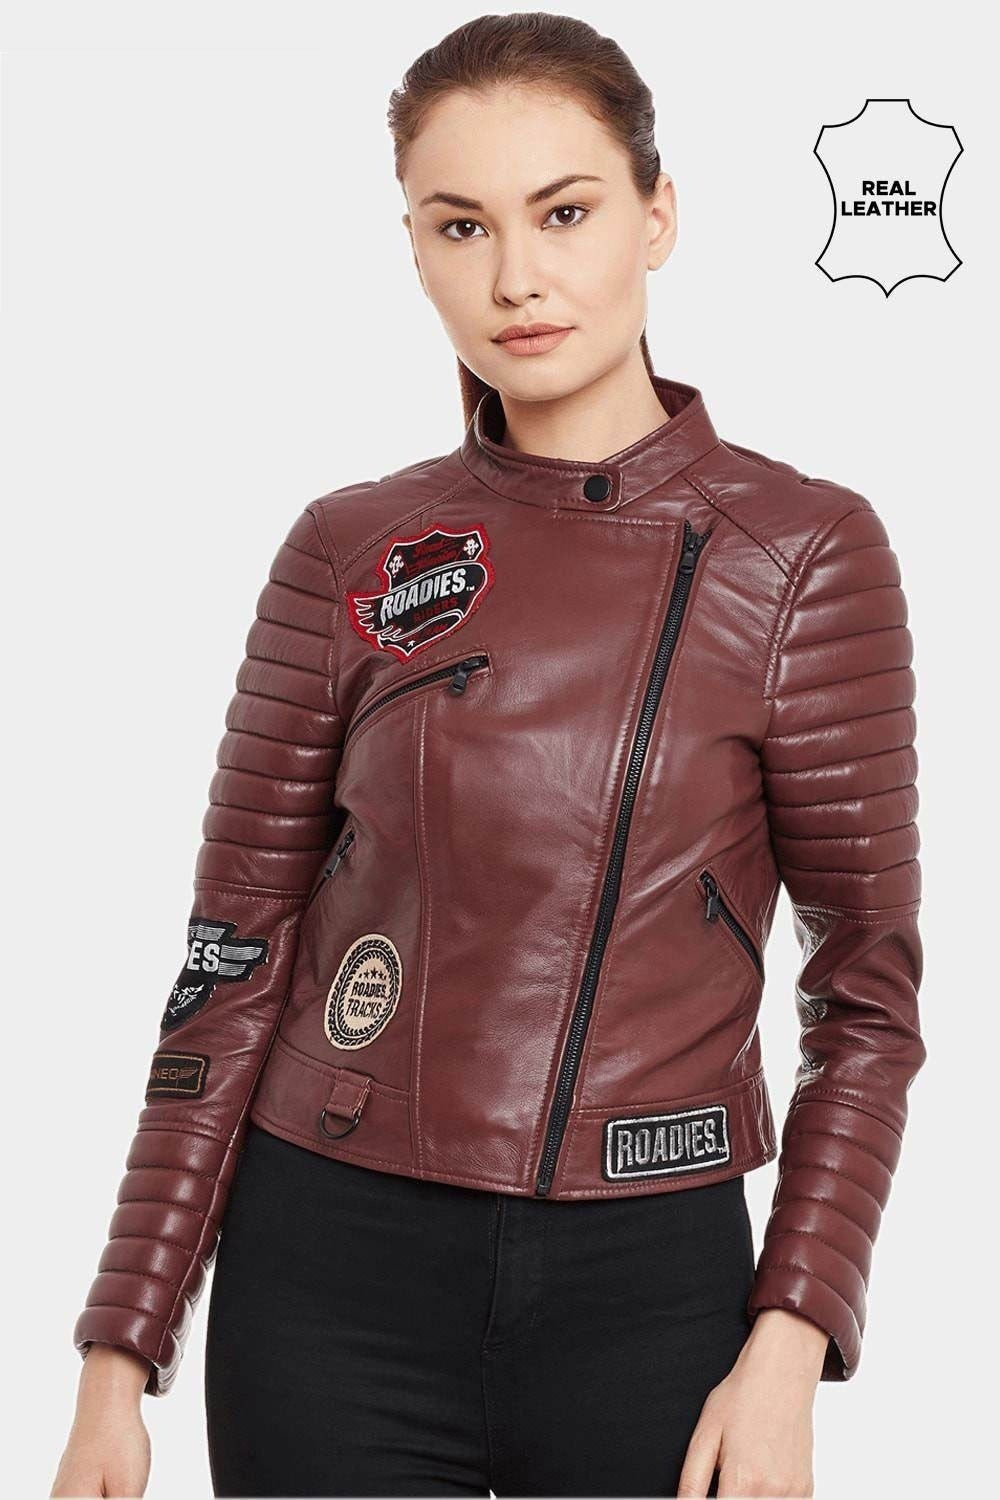 Justanned Burgundy Womens Leather Jacket